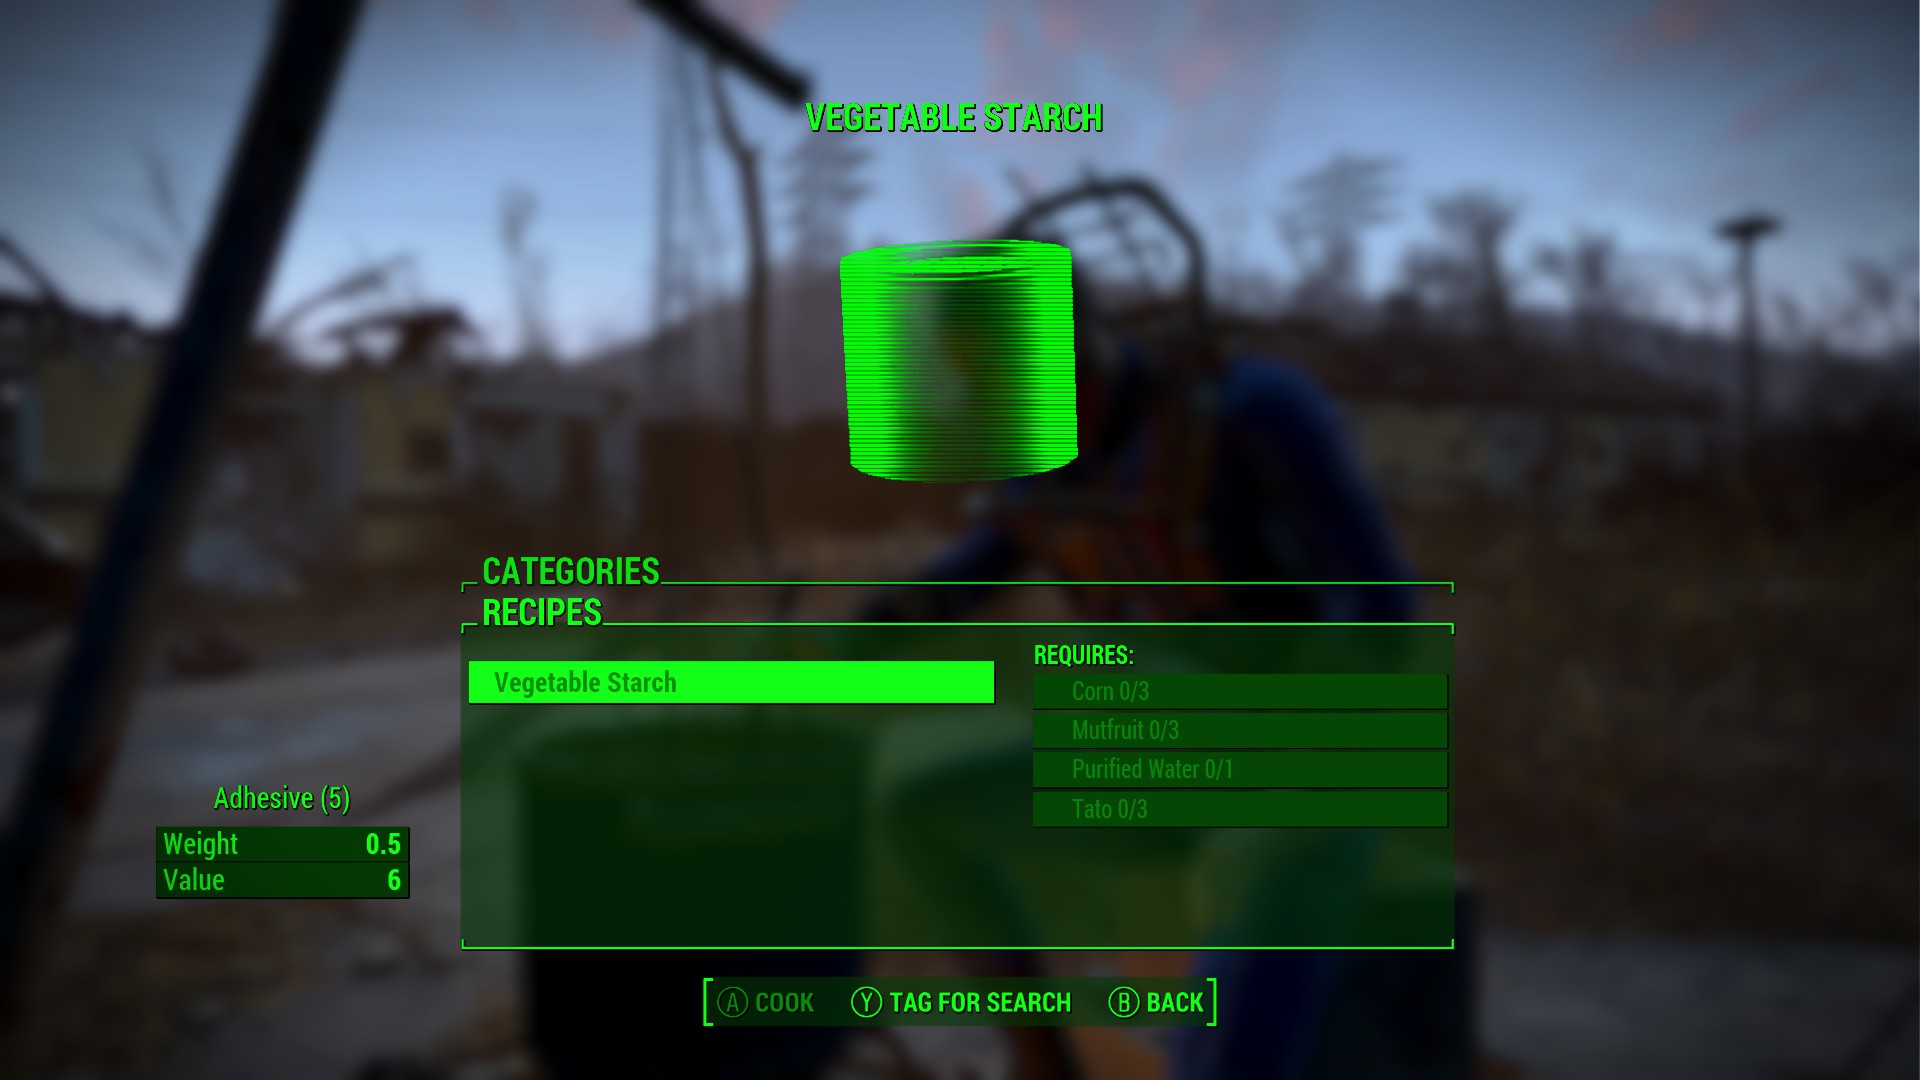 Fallout 4 Adhesive Vegetable Starch